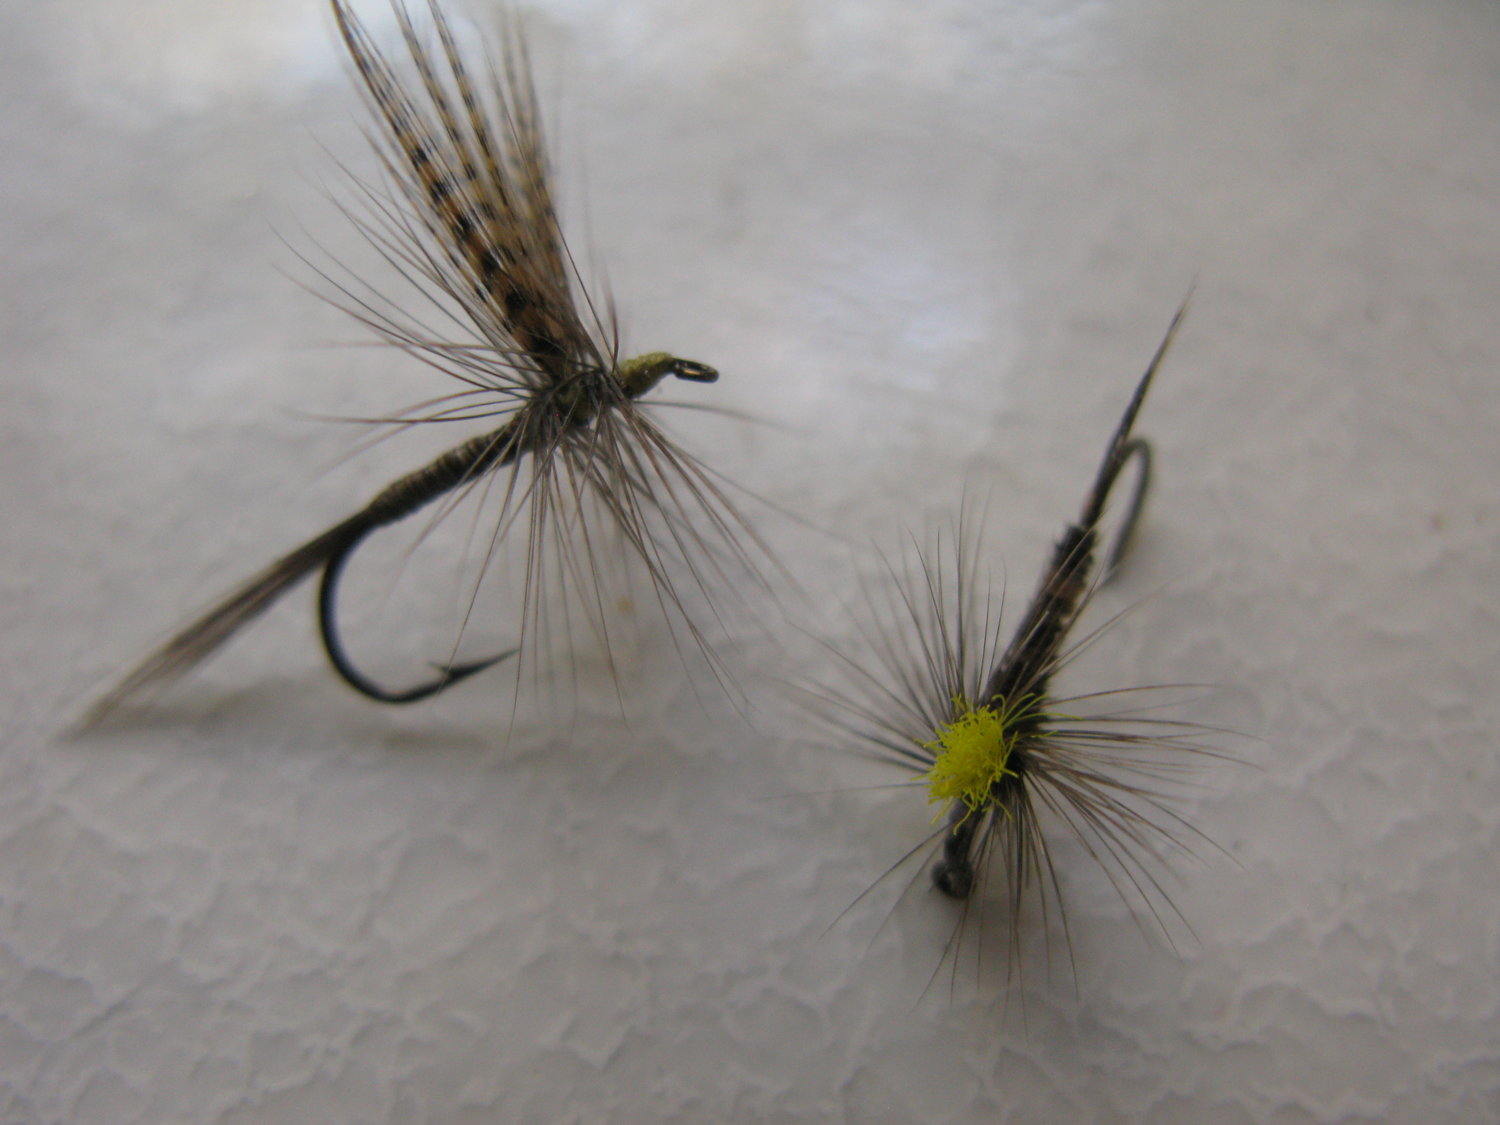 The parachute pheasant tail nymph, right, drifts in the surface film, unlike a traditional dry fly that floats on the surface.